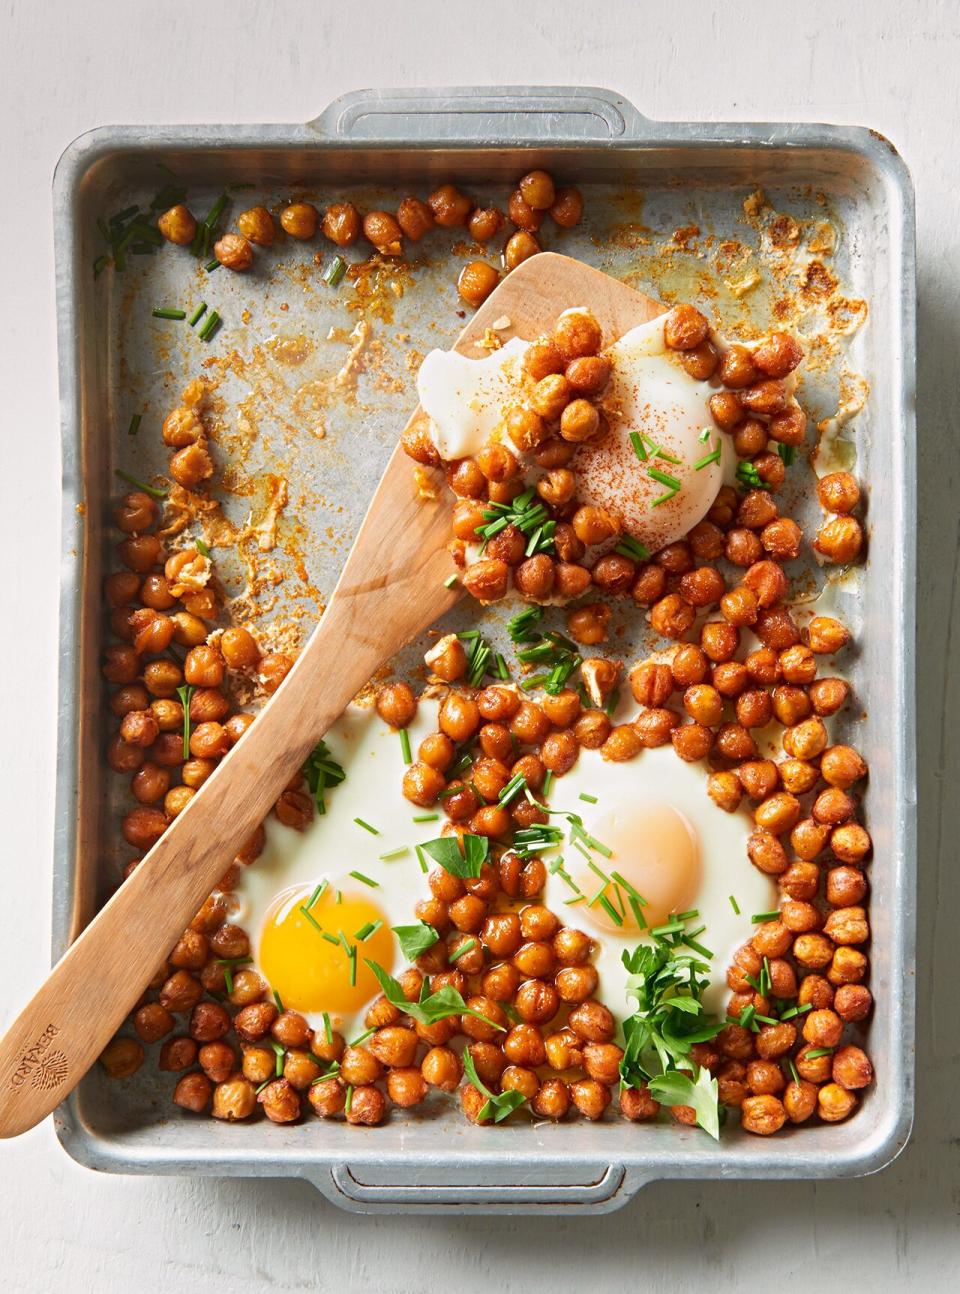 Paprika-spiced chickpeas and eggs are just as delicious for breakfast as they are for dinner. Try this sheet pan recipe for a speedy supper on a busy weeknight.